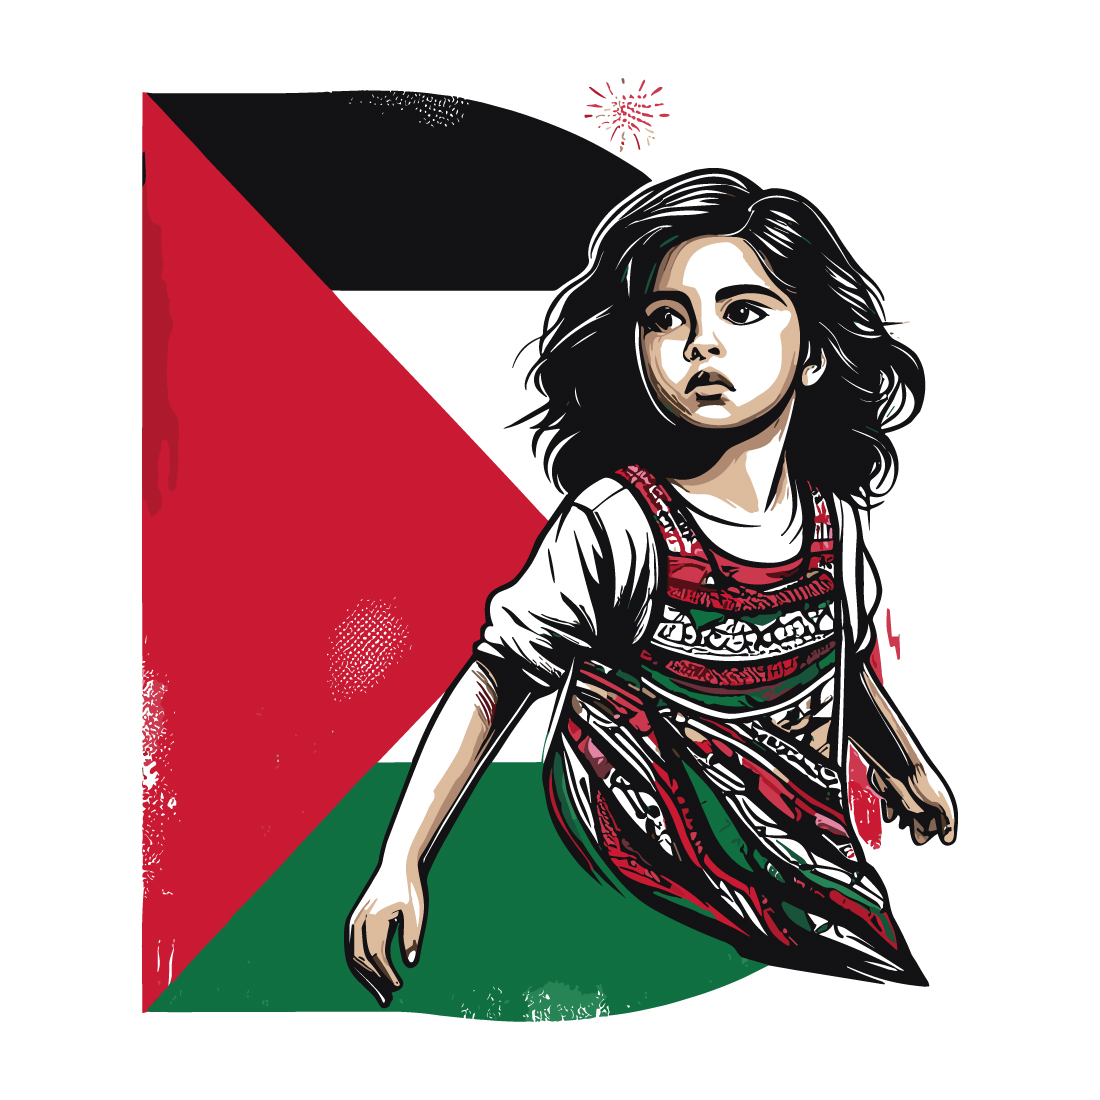 t-shirt depicting the suffering and struggle of Palestine with letter or flag preview image.